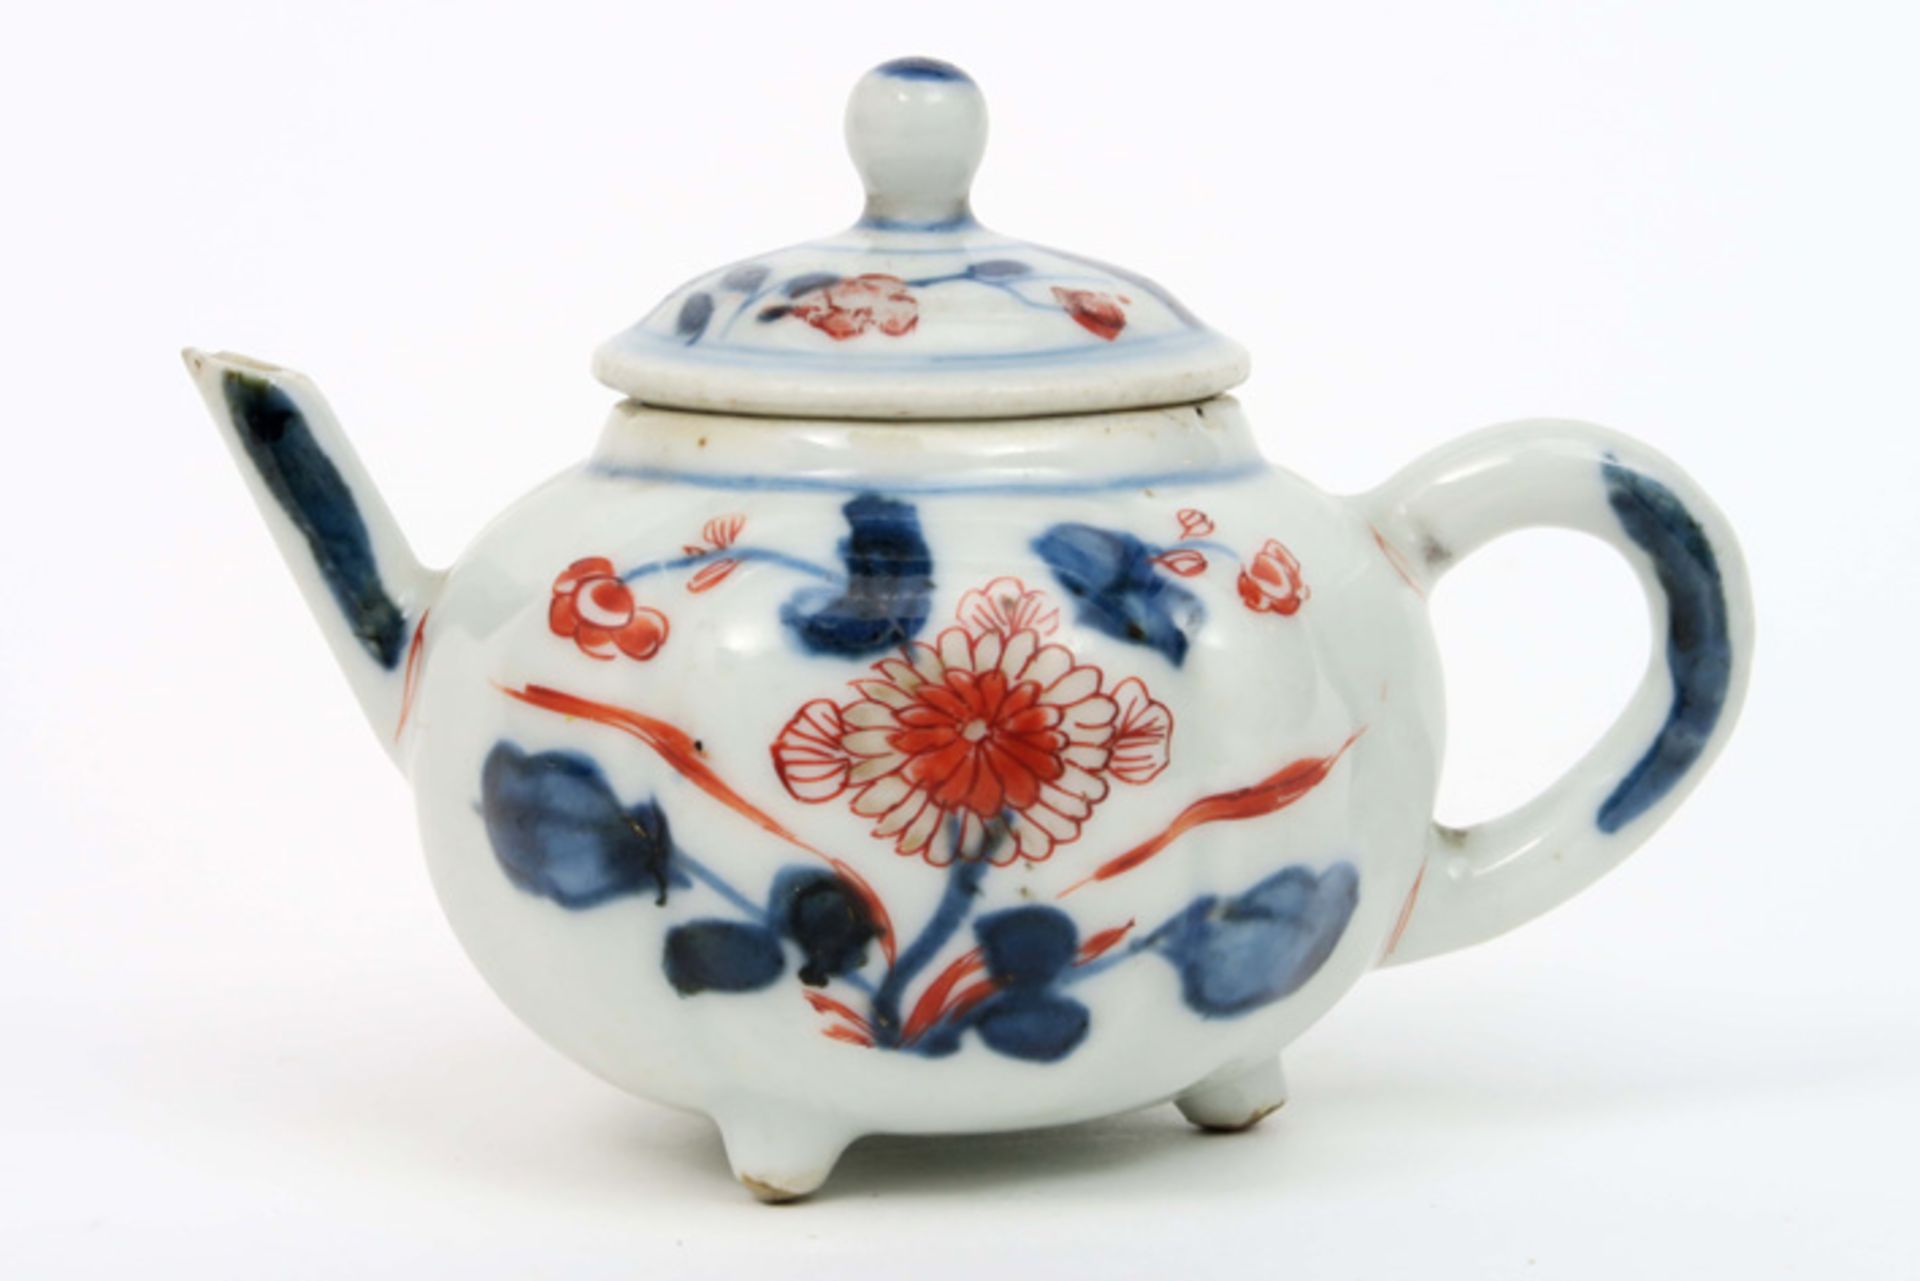 small 18th Cent. Chinese lidded tea pot in porcelain with an Imari flowers decor||Achttiende eeuwse 